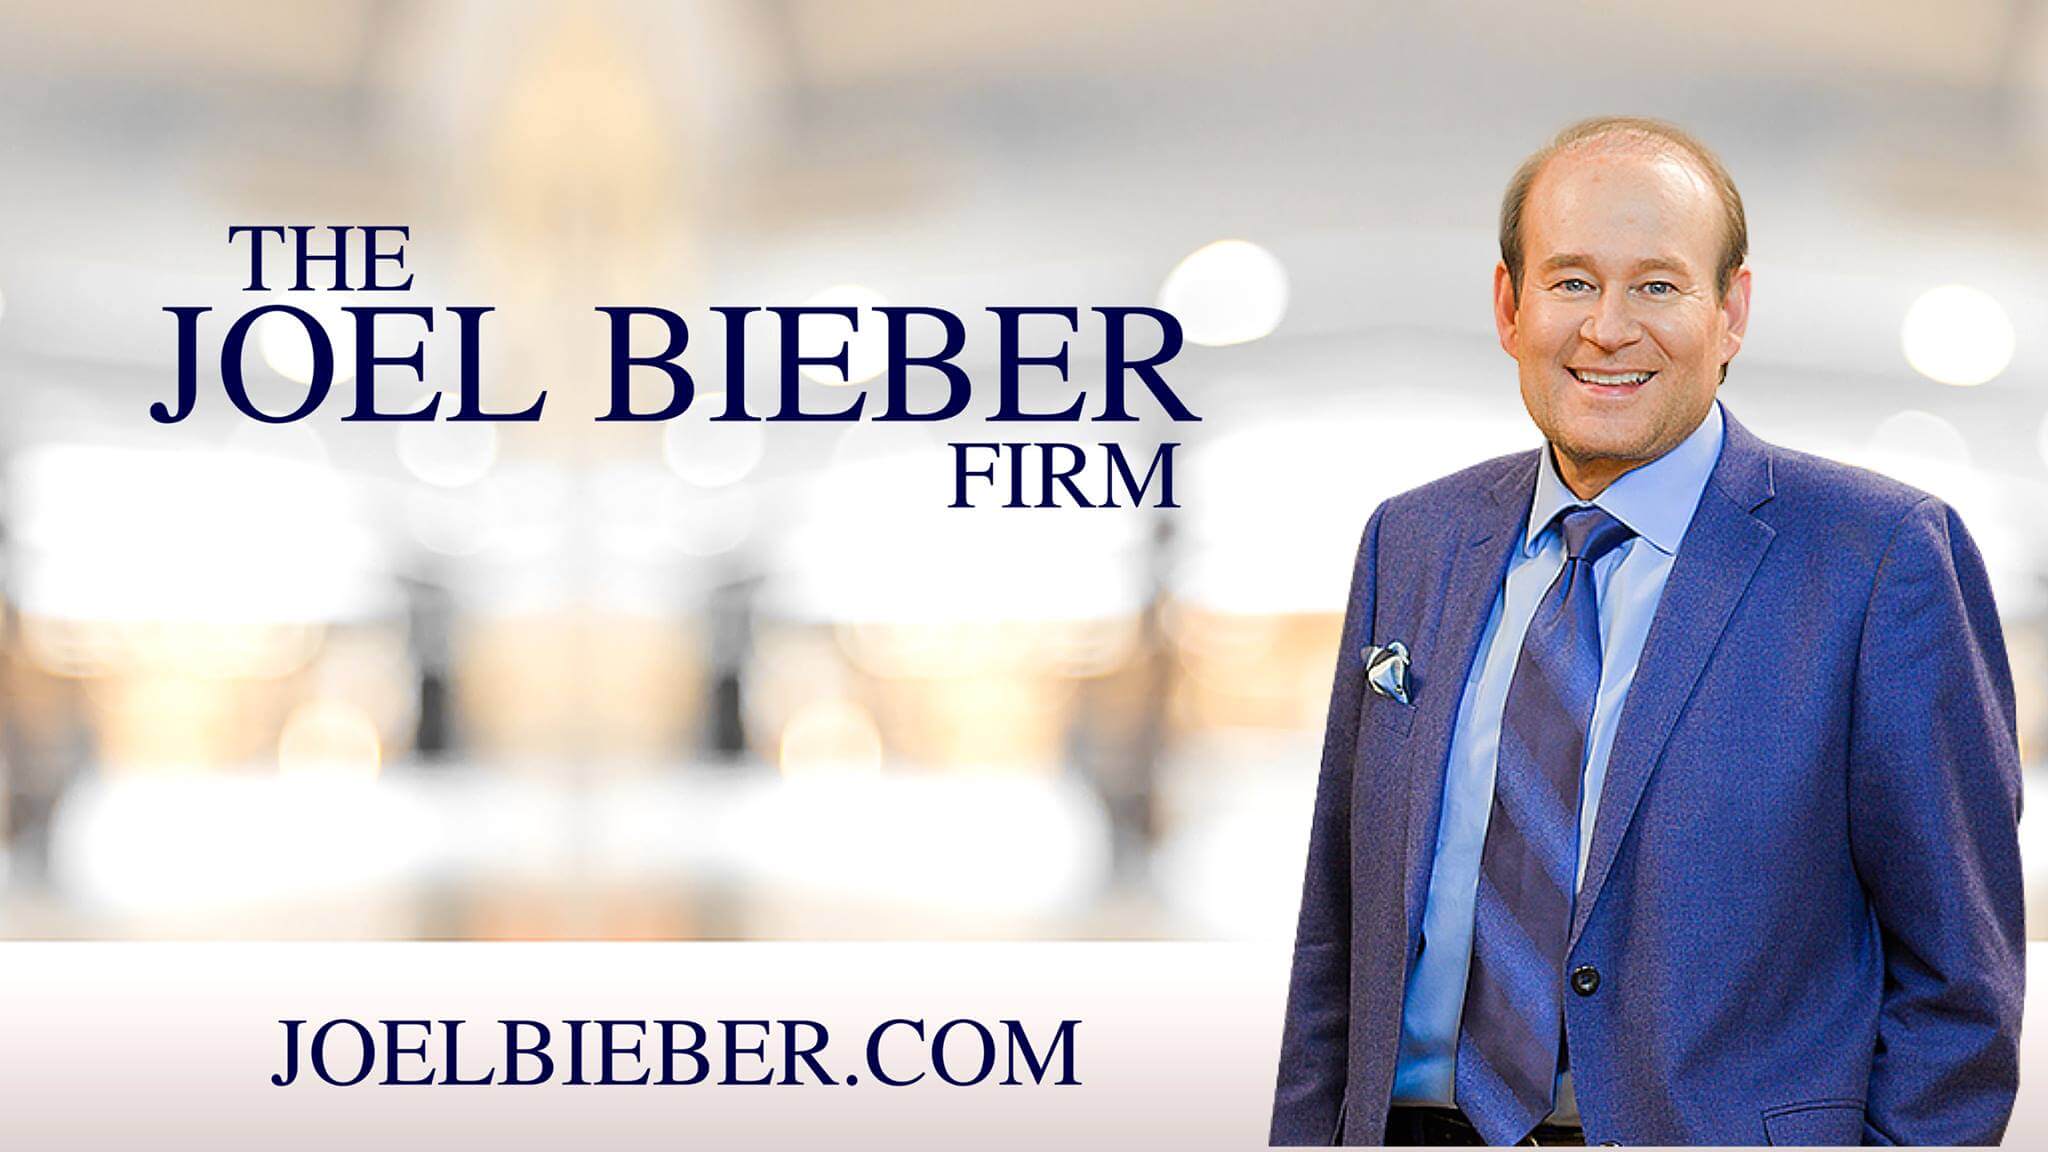 essure attorneys - the joel bieber firm - home facebook on baltimore car accident lawyer the joel bieber firm